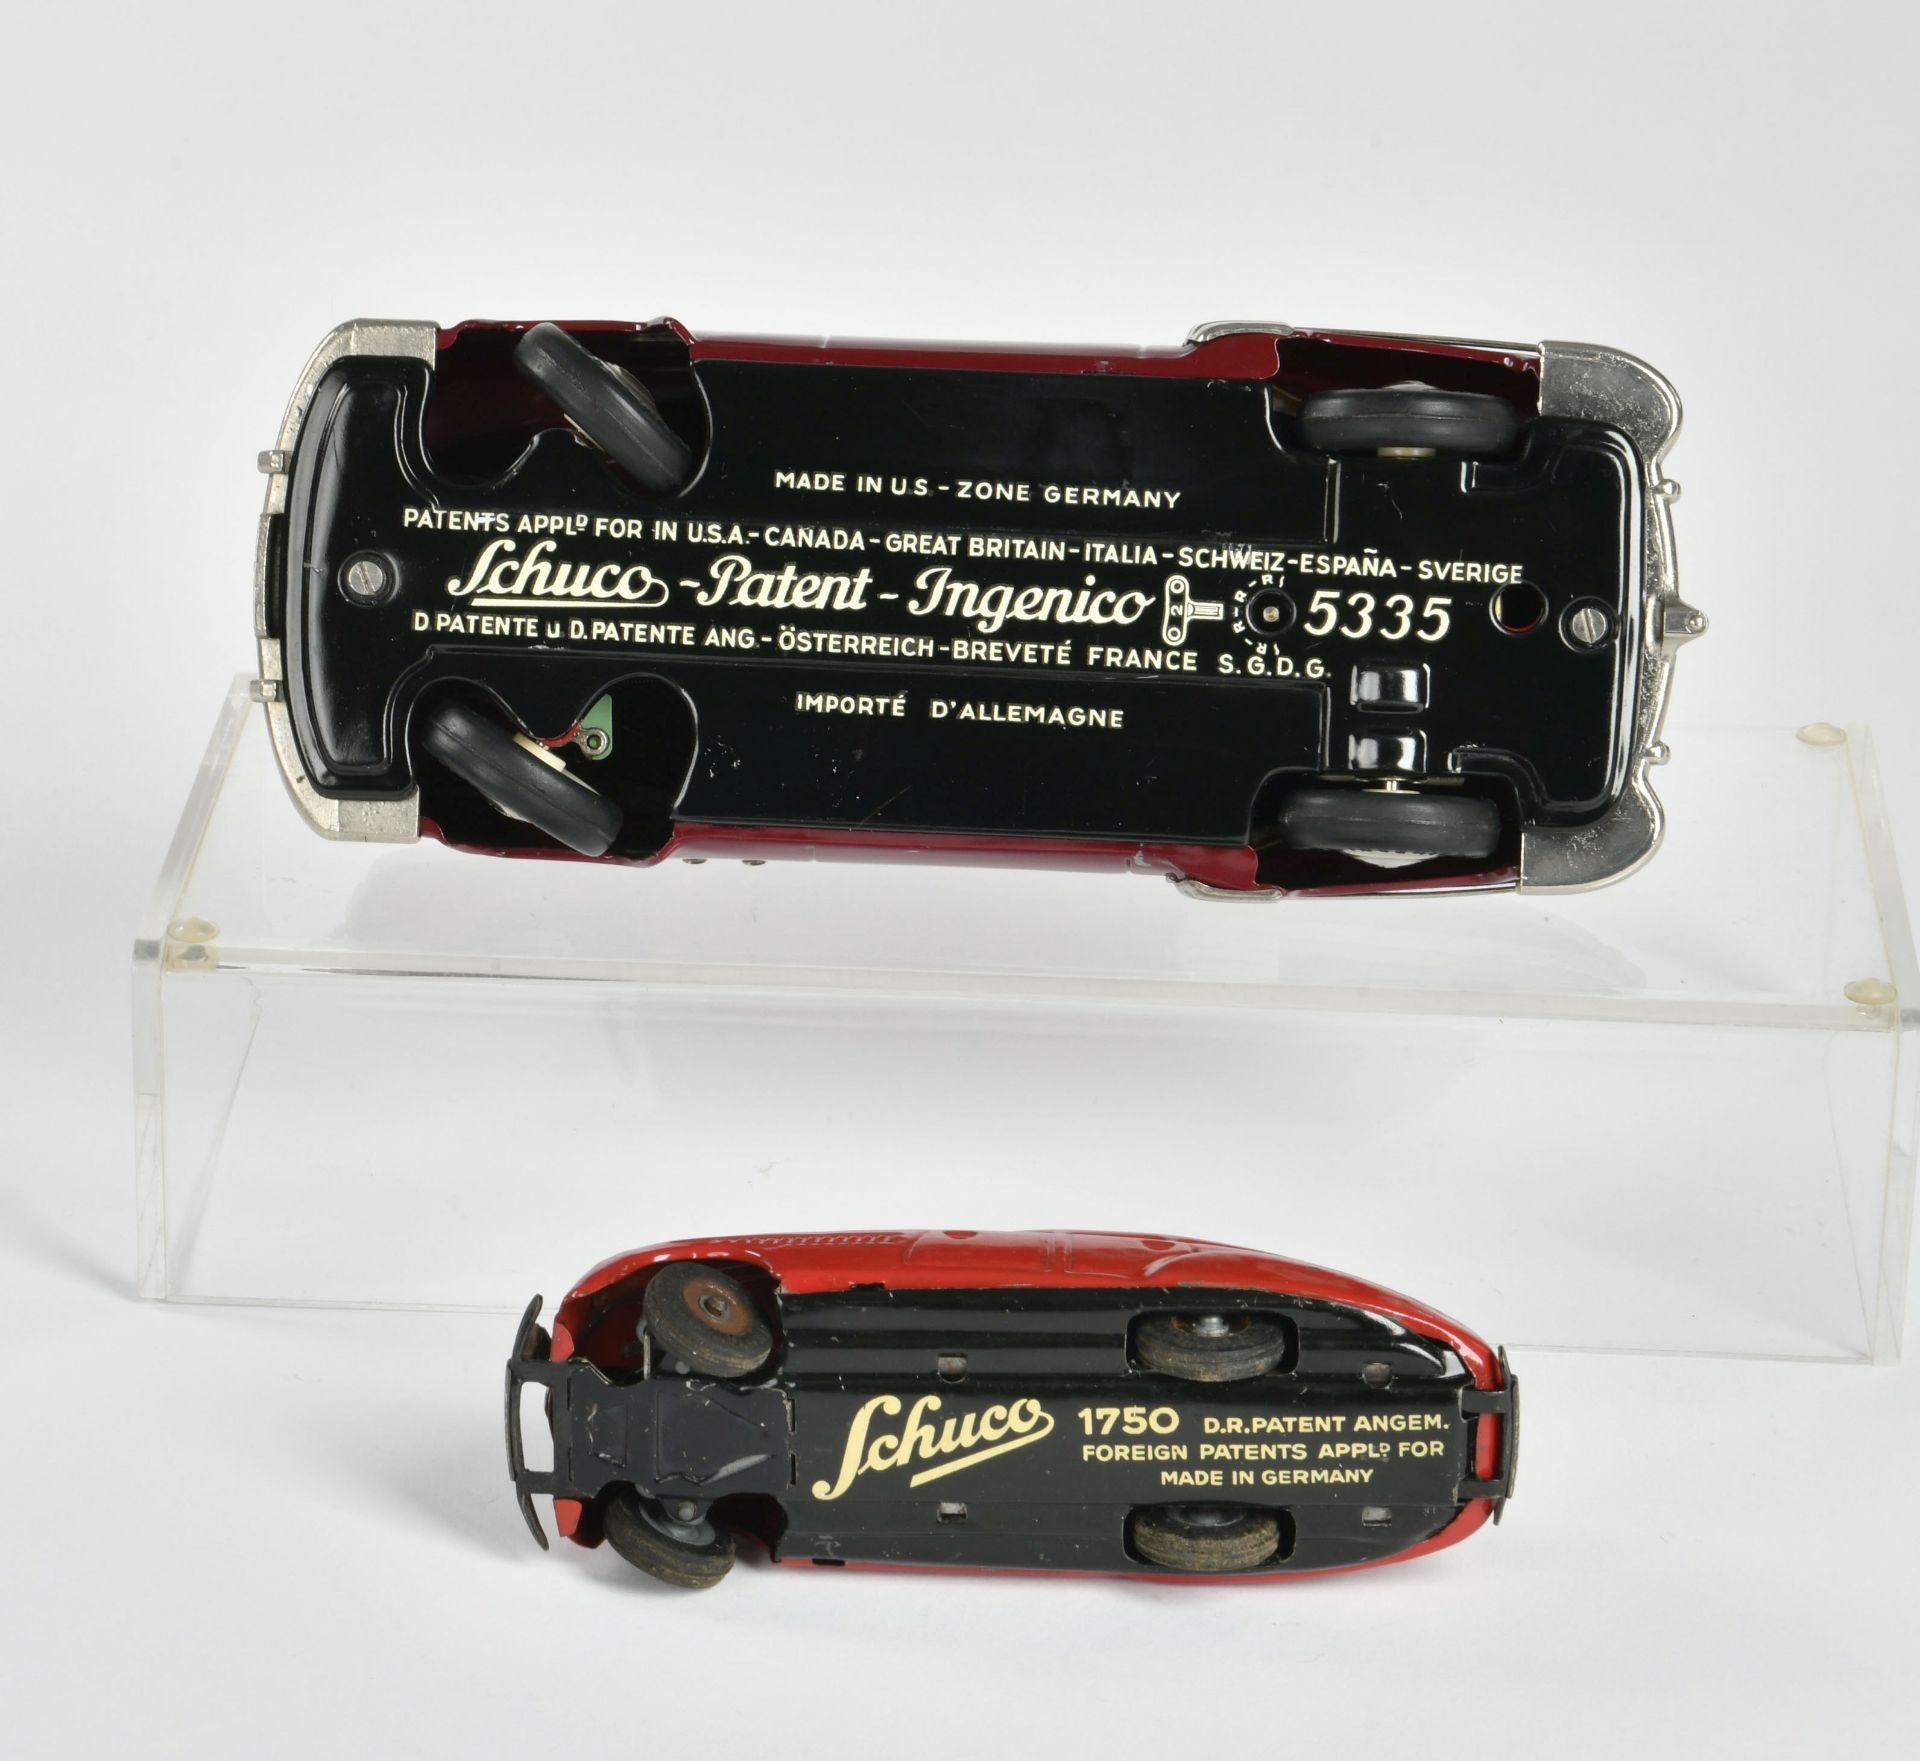 Schuco patent car 1750 + Ingenico 5335, Germany, paint d. on 1750, C 1-/3 - Image 3 of 3